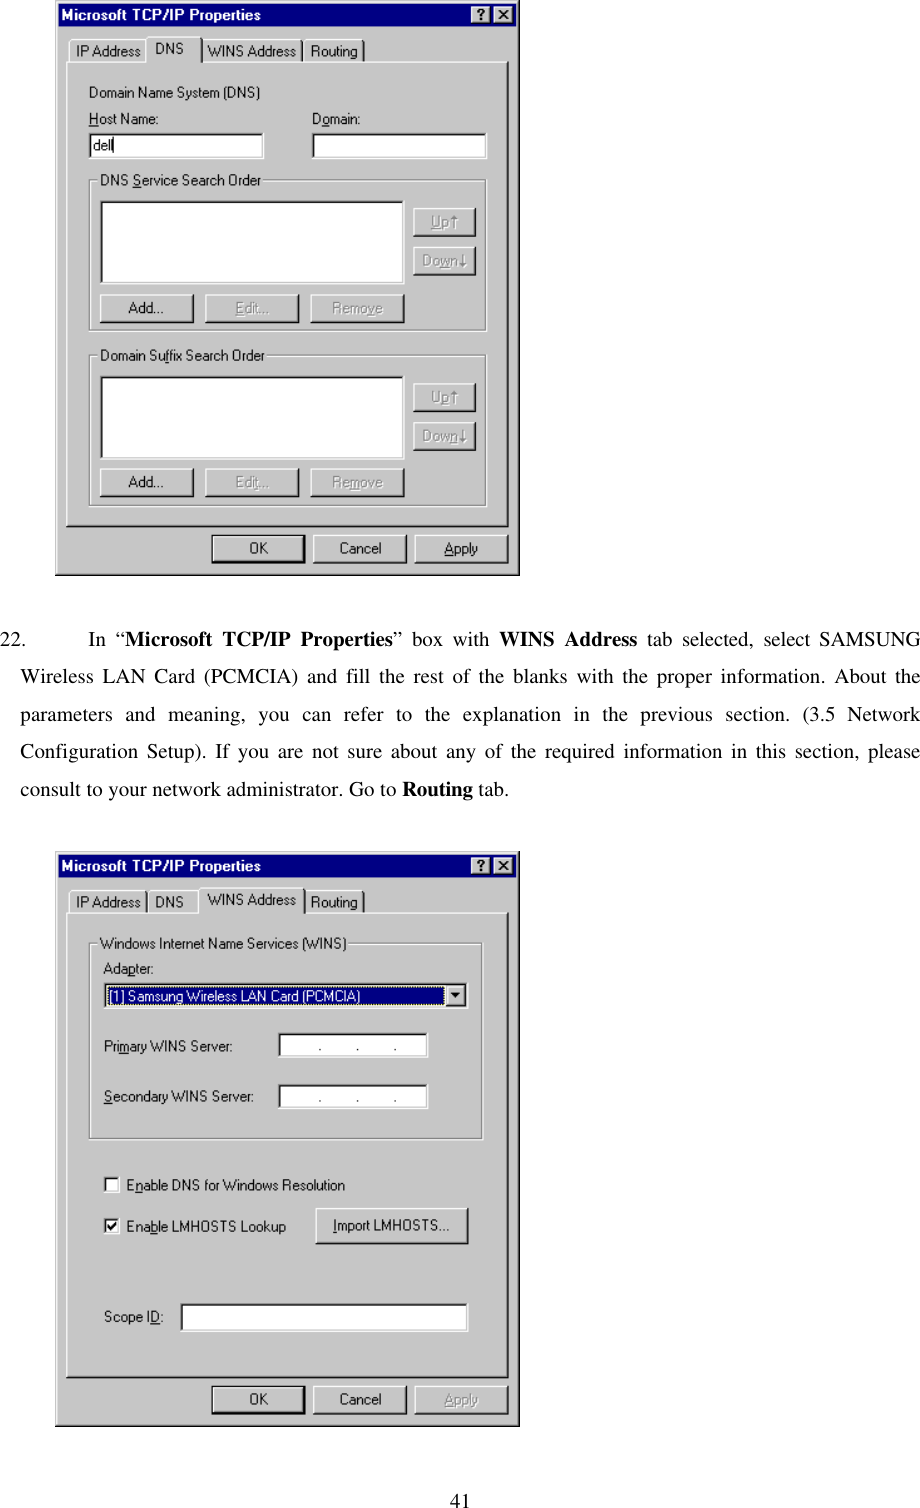  41             22. In “Microsoft TCP/IP Properties” box with WINS Address tab selected, select SAMSUNG Wireless LAN Card (PCMCIA) and fill the rest of the blanks with the proper information. About the parameters and meaning, you can refer to the explanation in the previous section. (3.5 Network Configuration Setup). If you are not sure about any of the required information in this section, please consult to your network administrator. Go to Routing tab.               